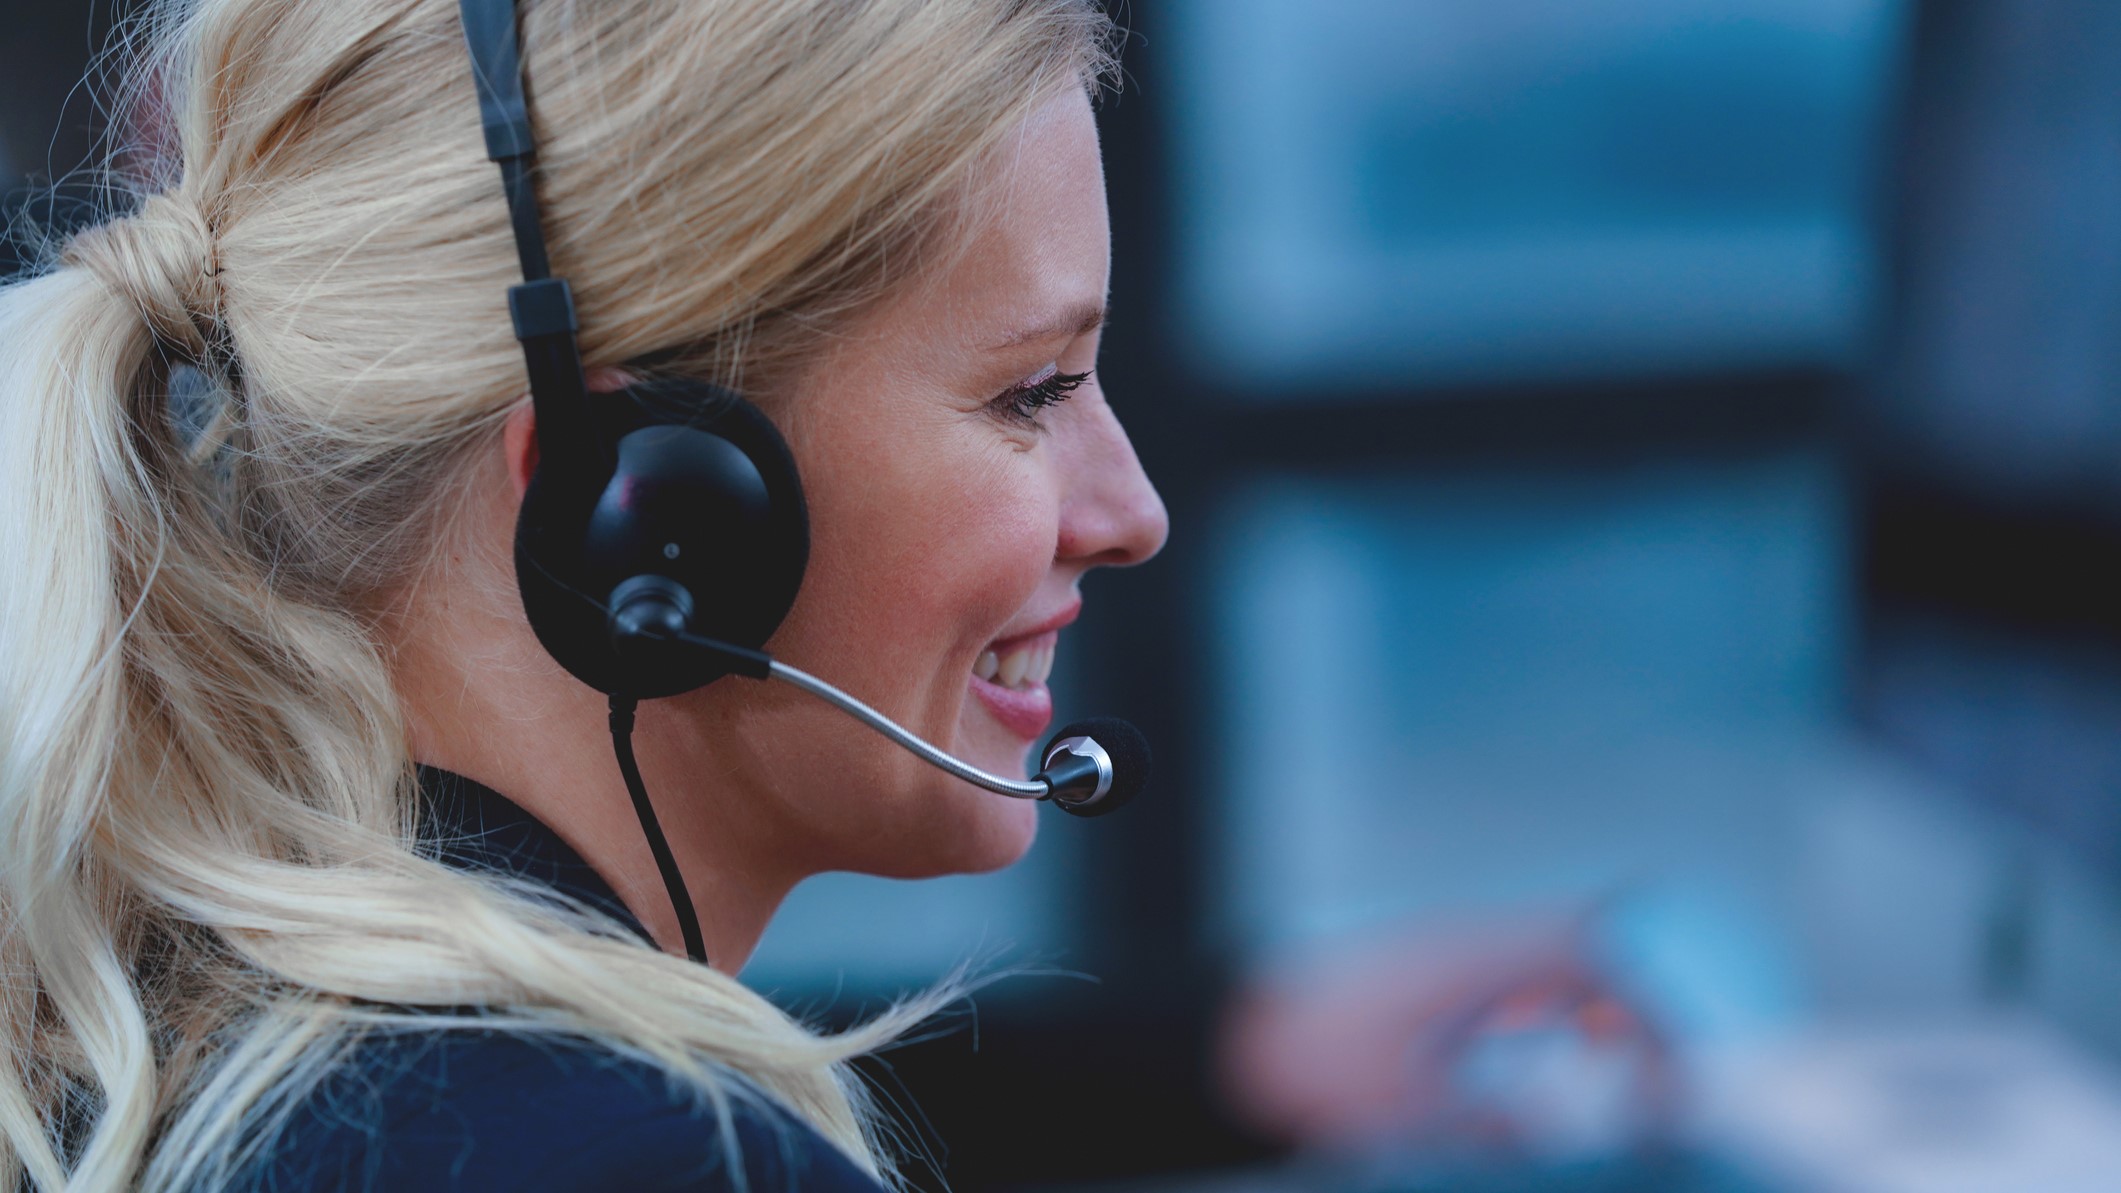 Aloha POS system customer service: Blond woman smiles with headset on